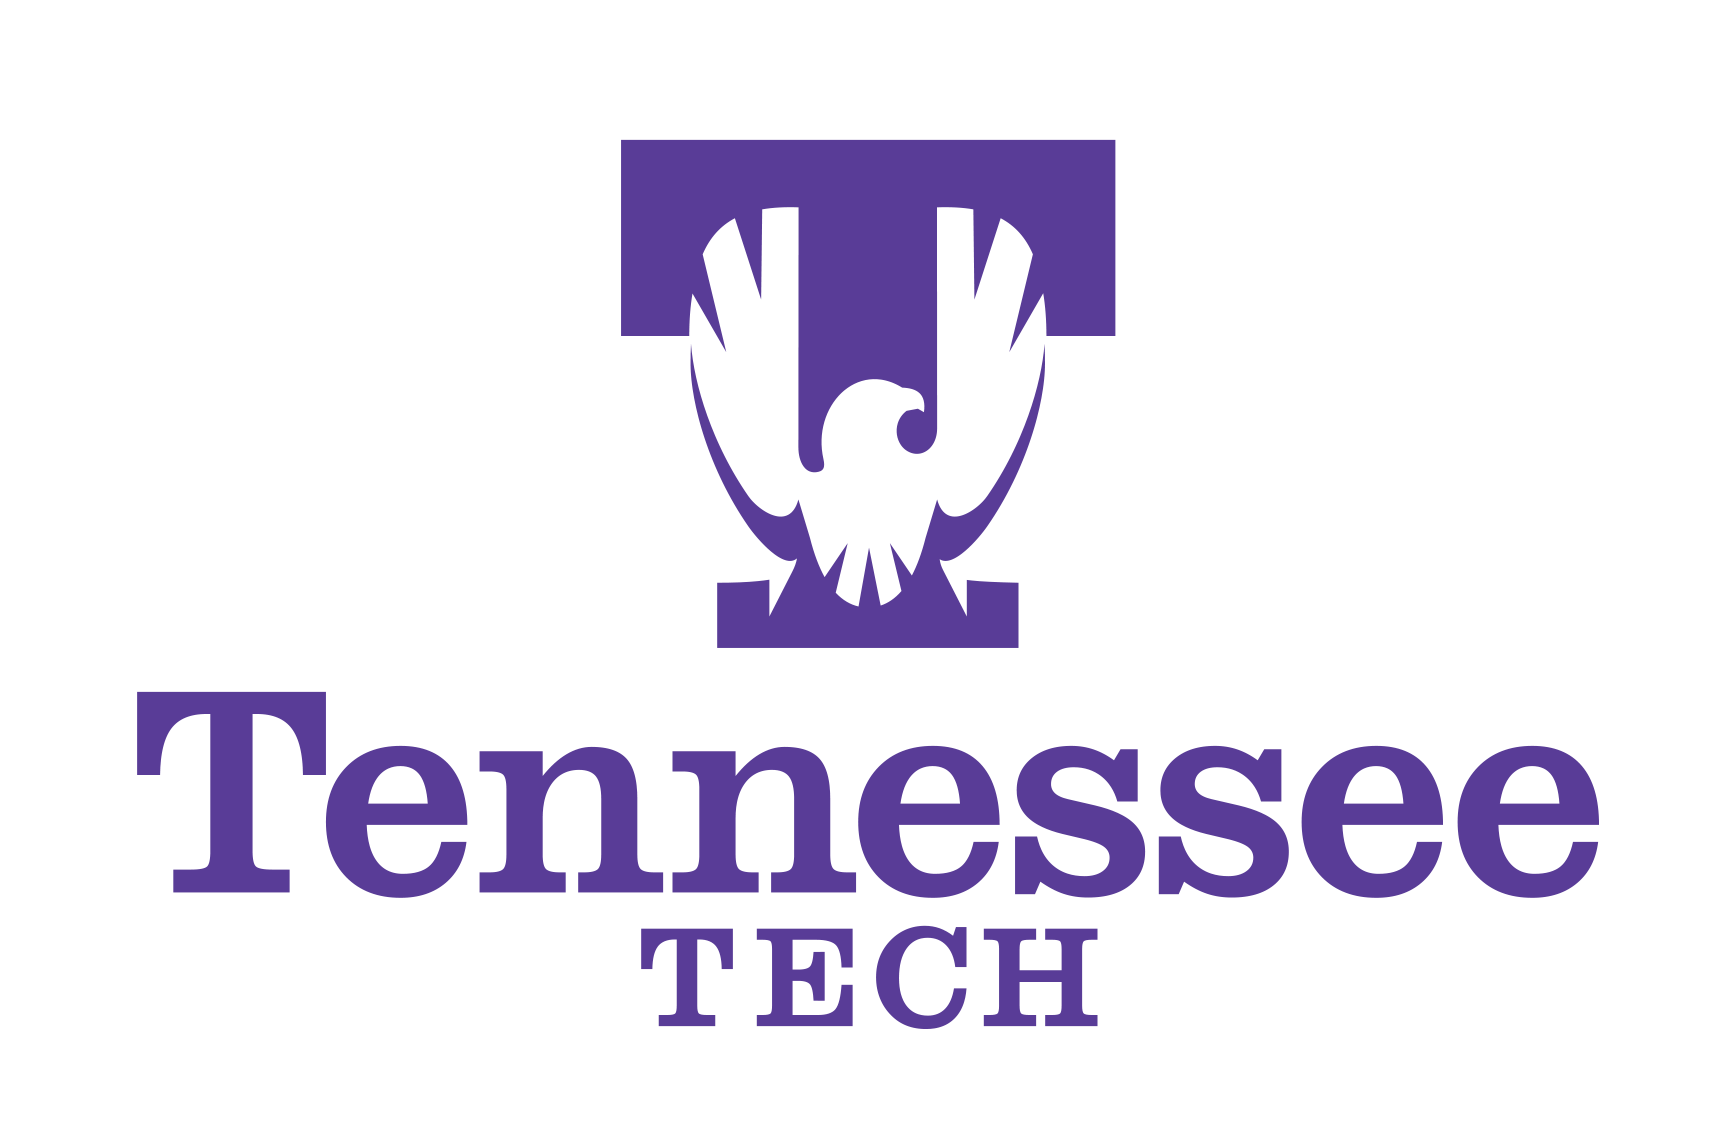 Tennessee Technological University post orders